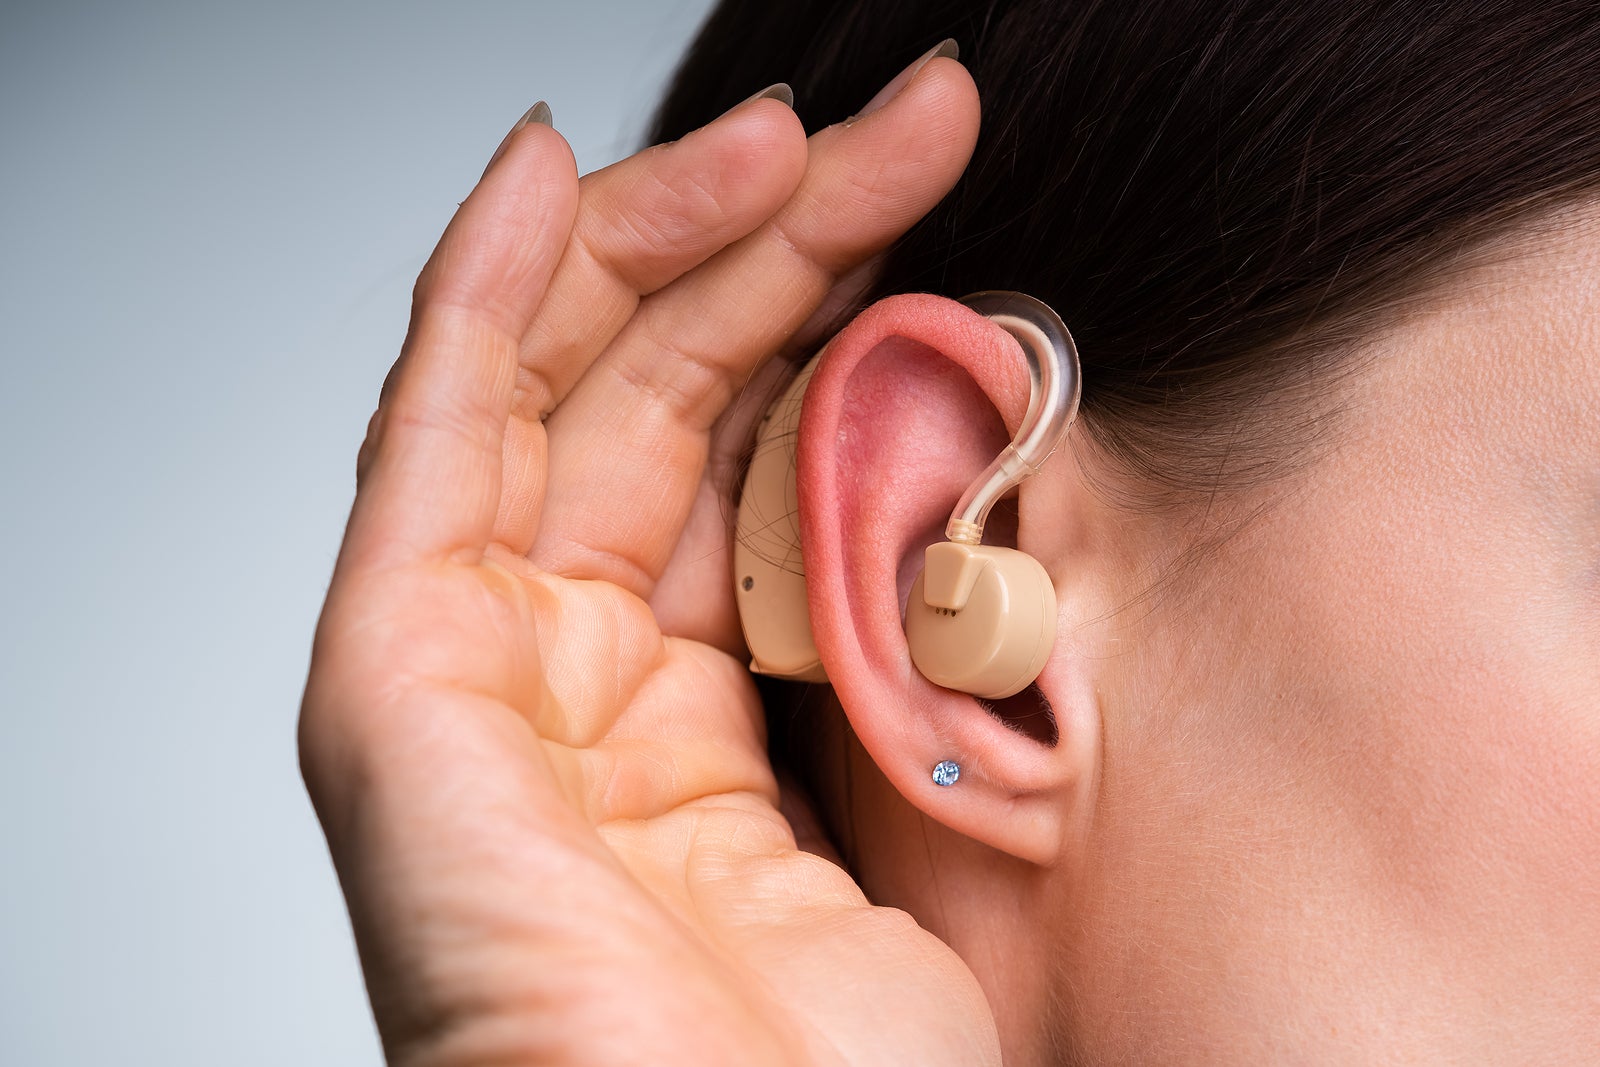 Over-the-counter hearing aids expected this fall in U.S. - WHYY